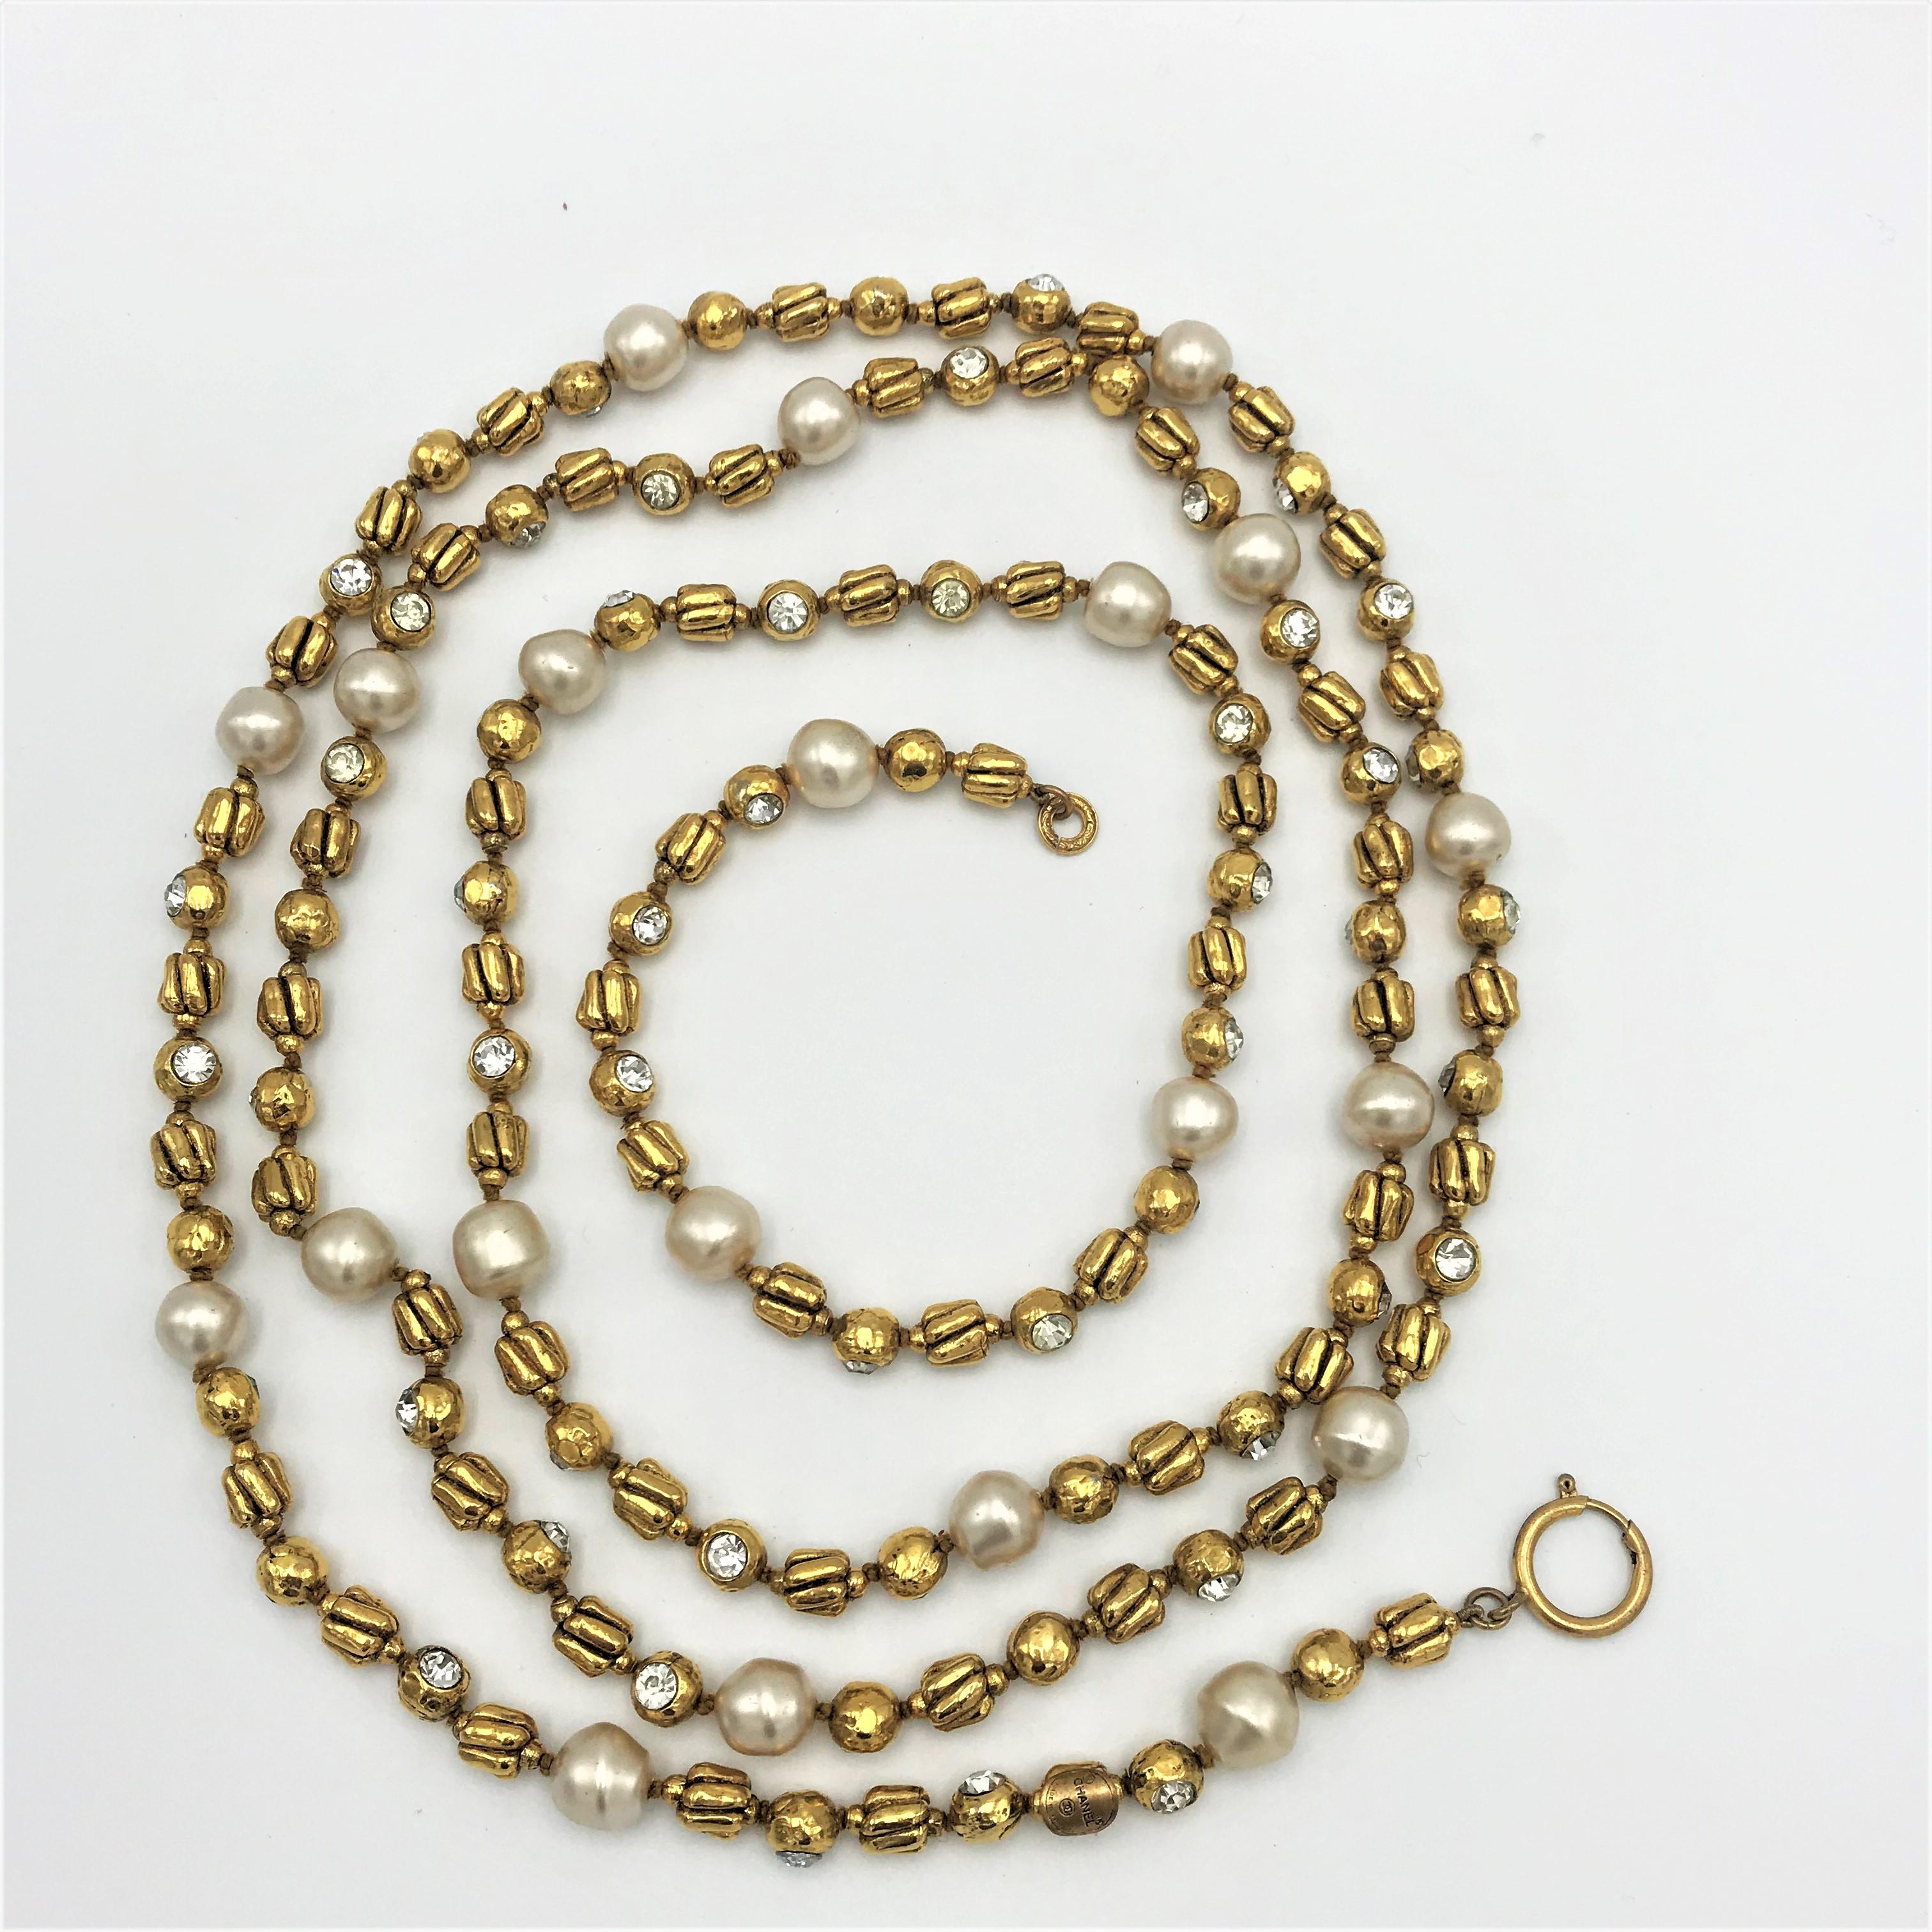 Round Cut Chanel necklace by R. Goossens with pearls, 183 cm lang gold plated, 1970/80s  For Sale